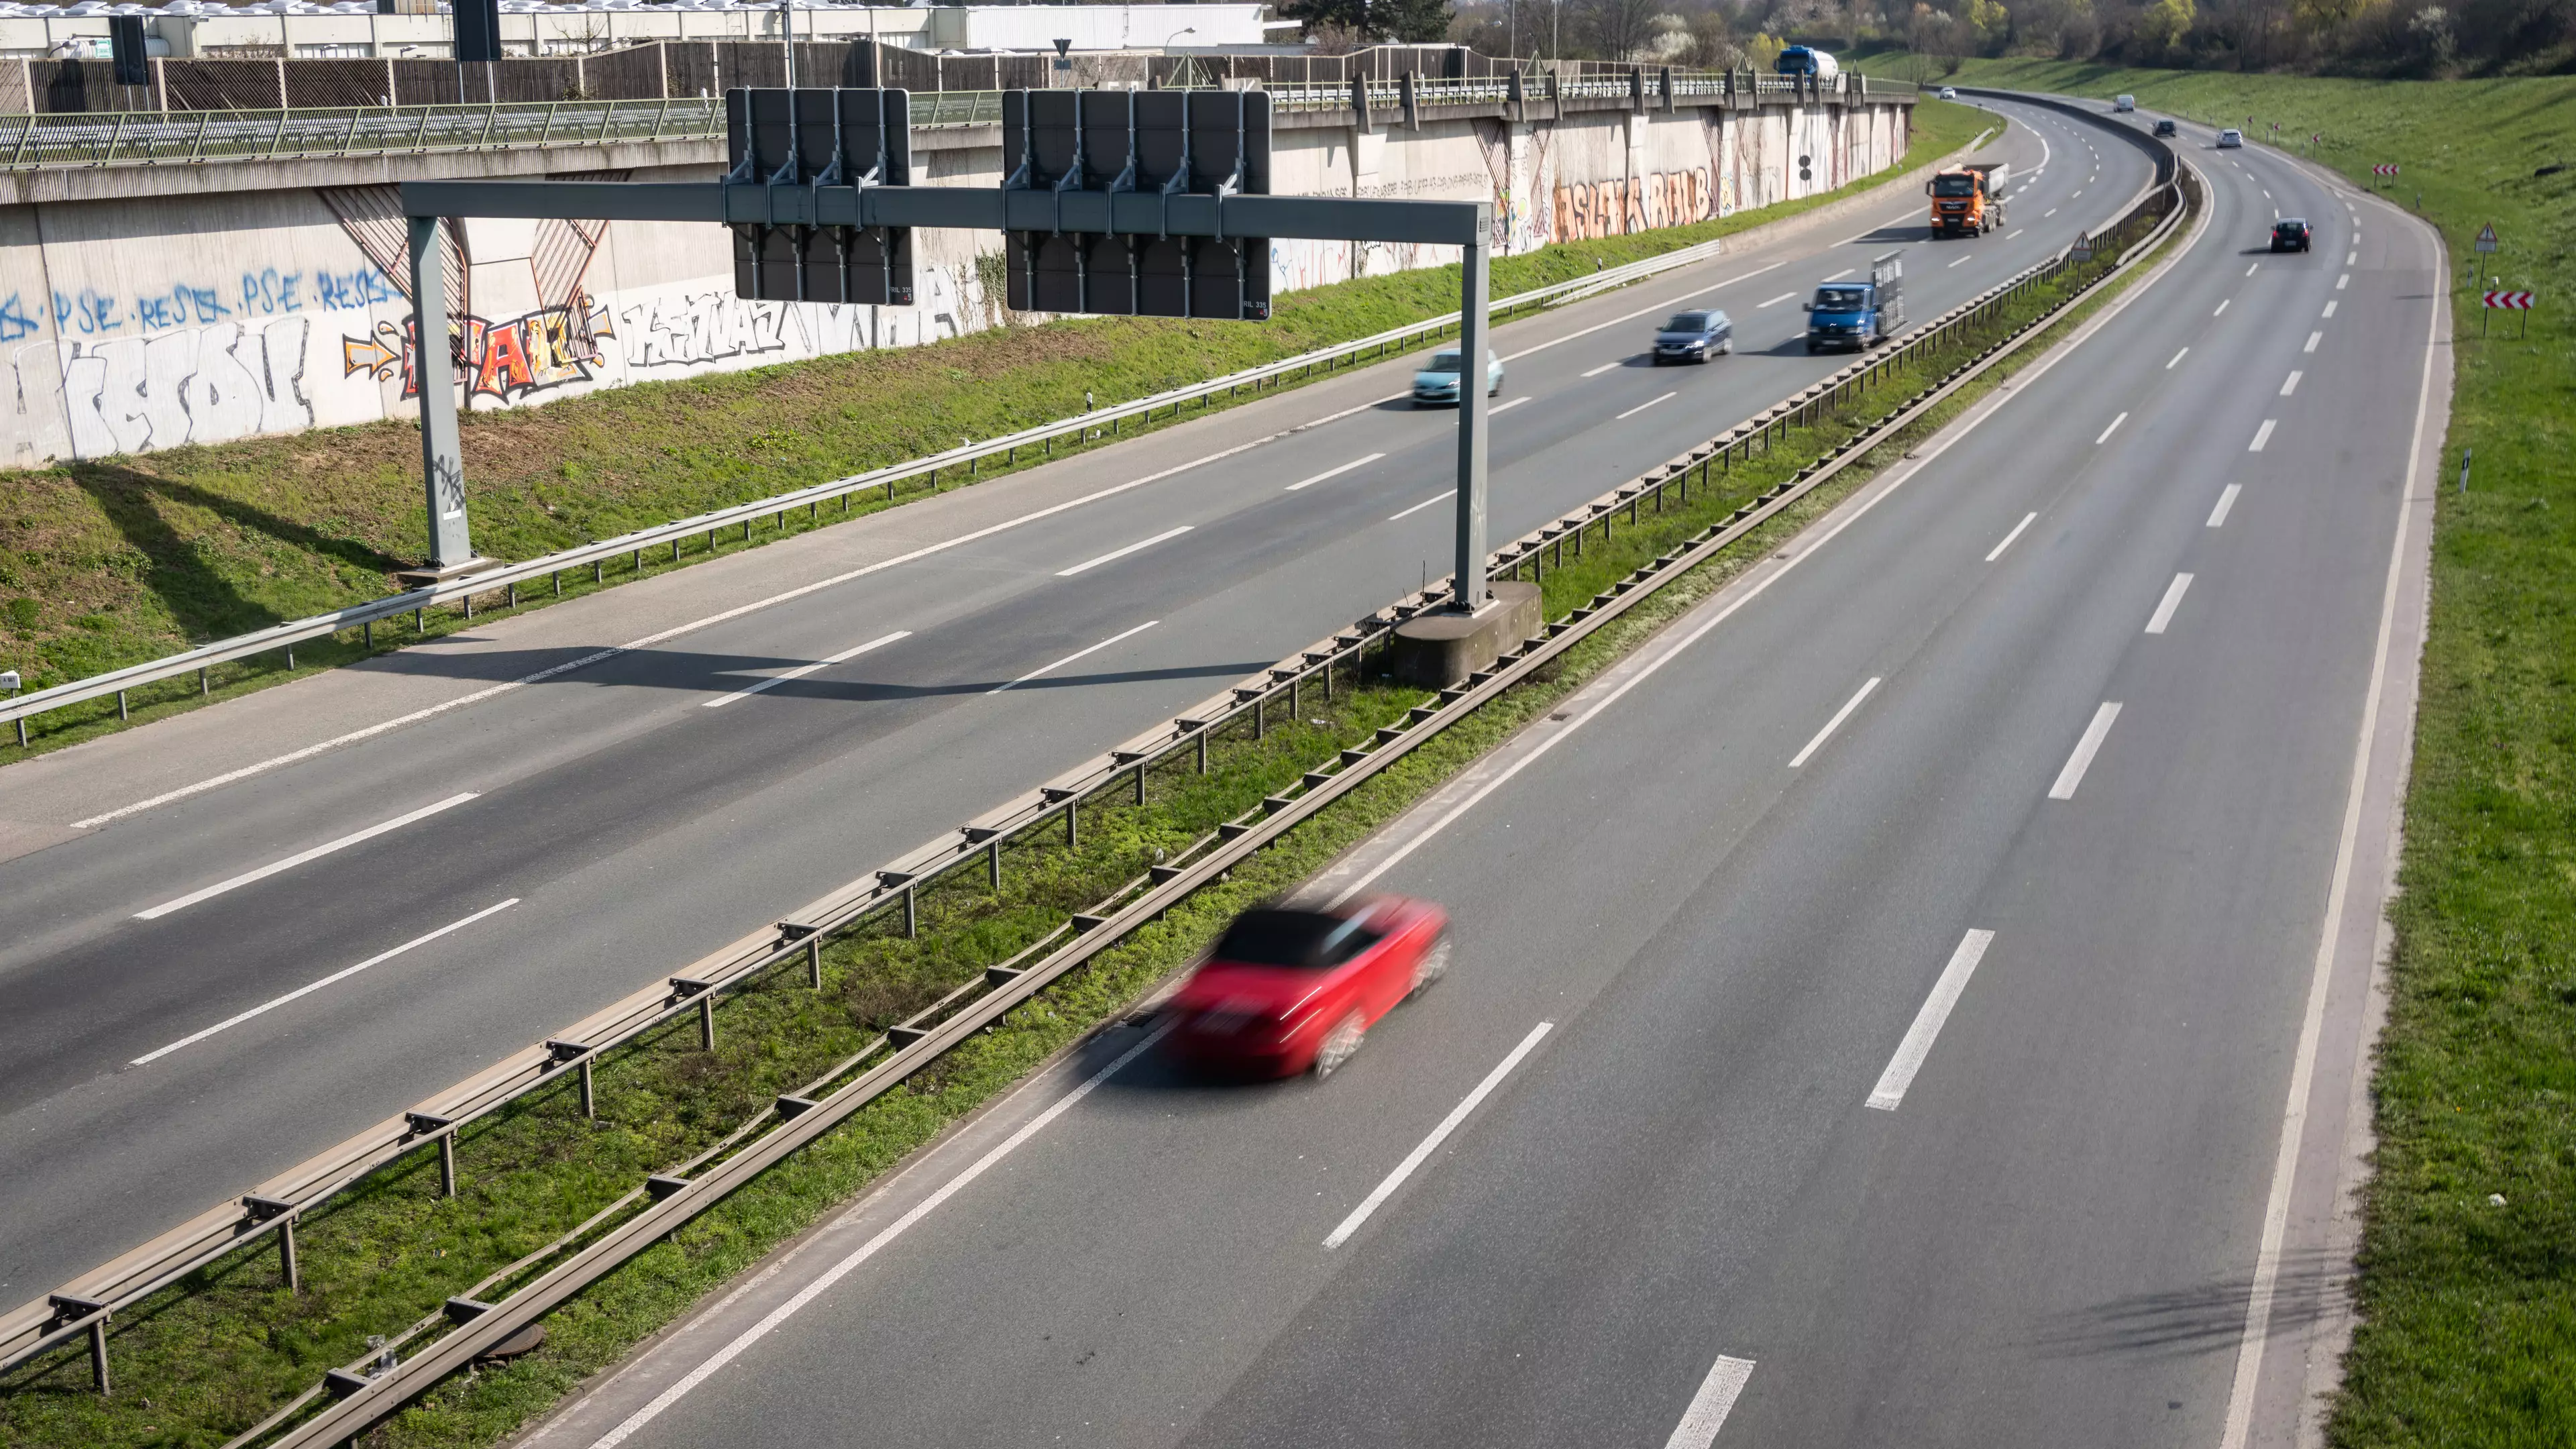 There’s A Medical Term For Driving On Motorway Without Consciously Doing So